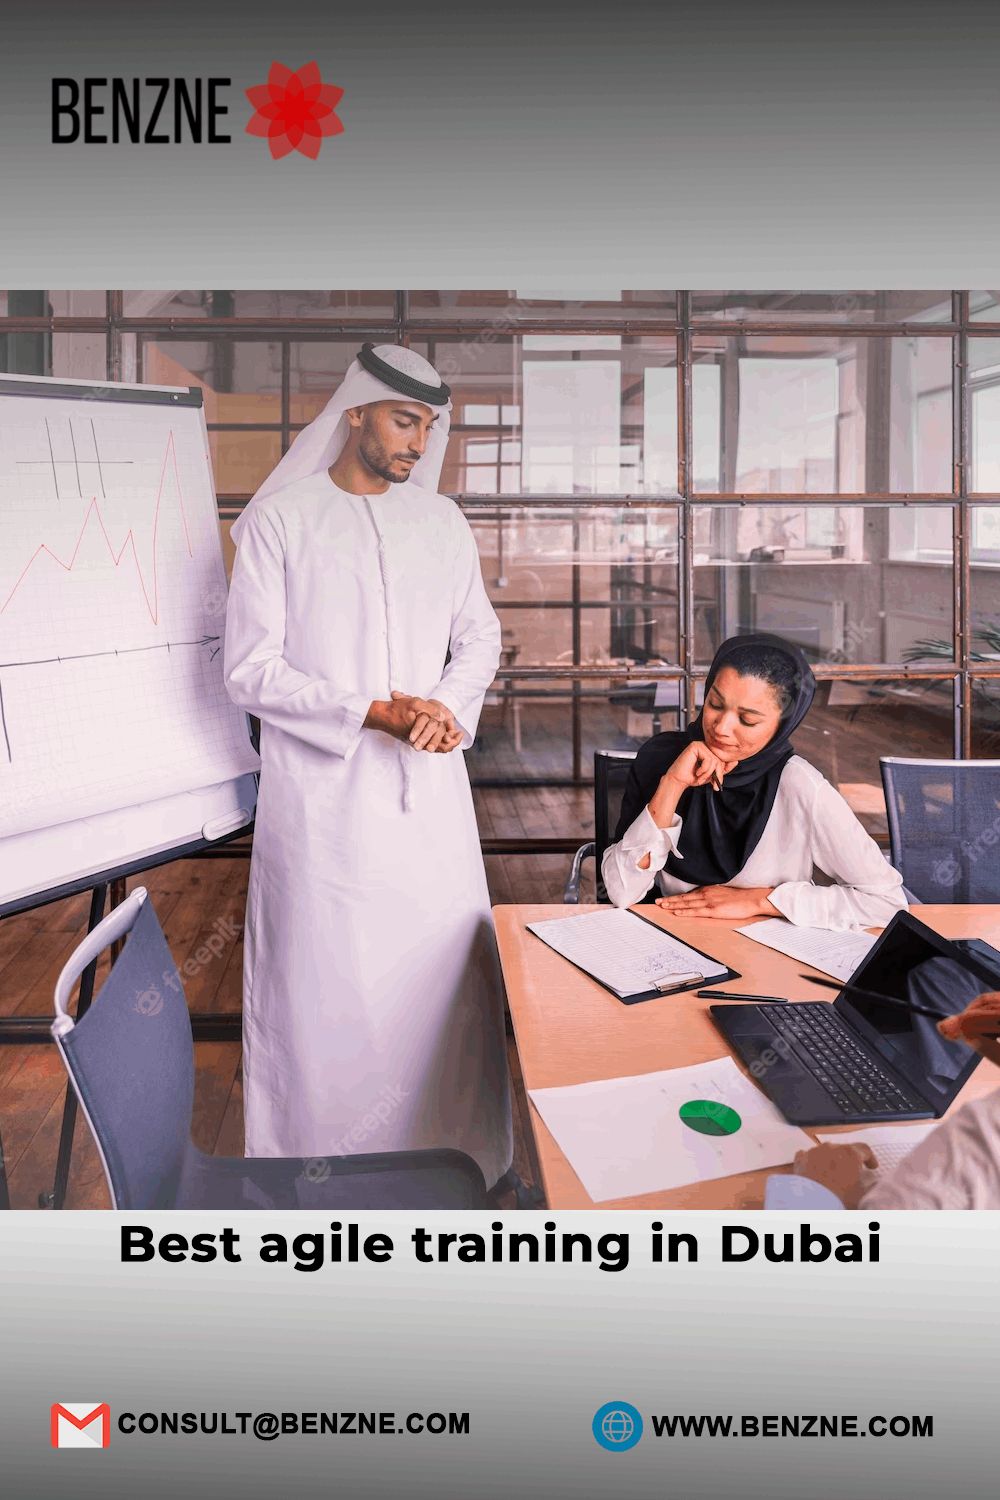 Best Agile Training In Dubai With Benzne To Scale The Agile Practice With Utmost Effort